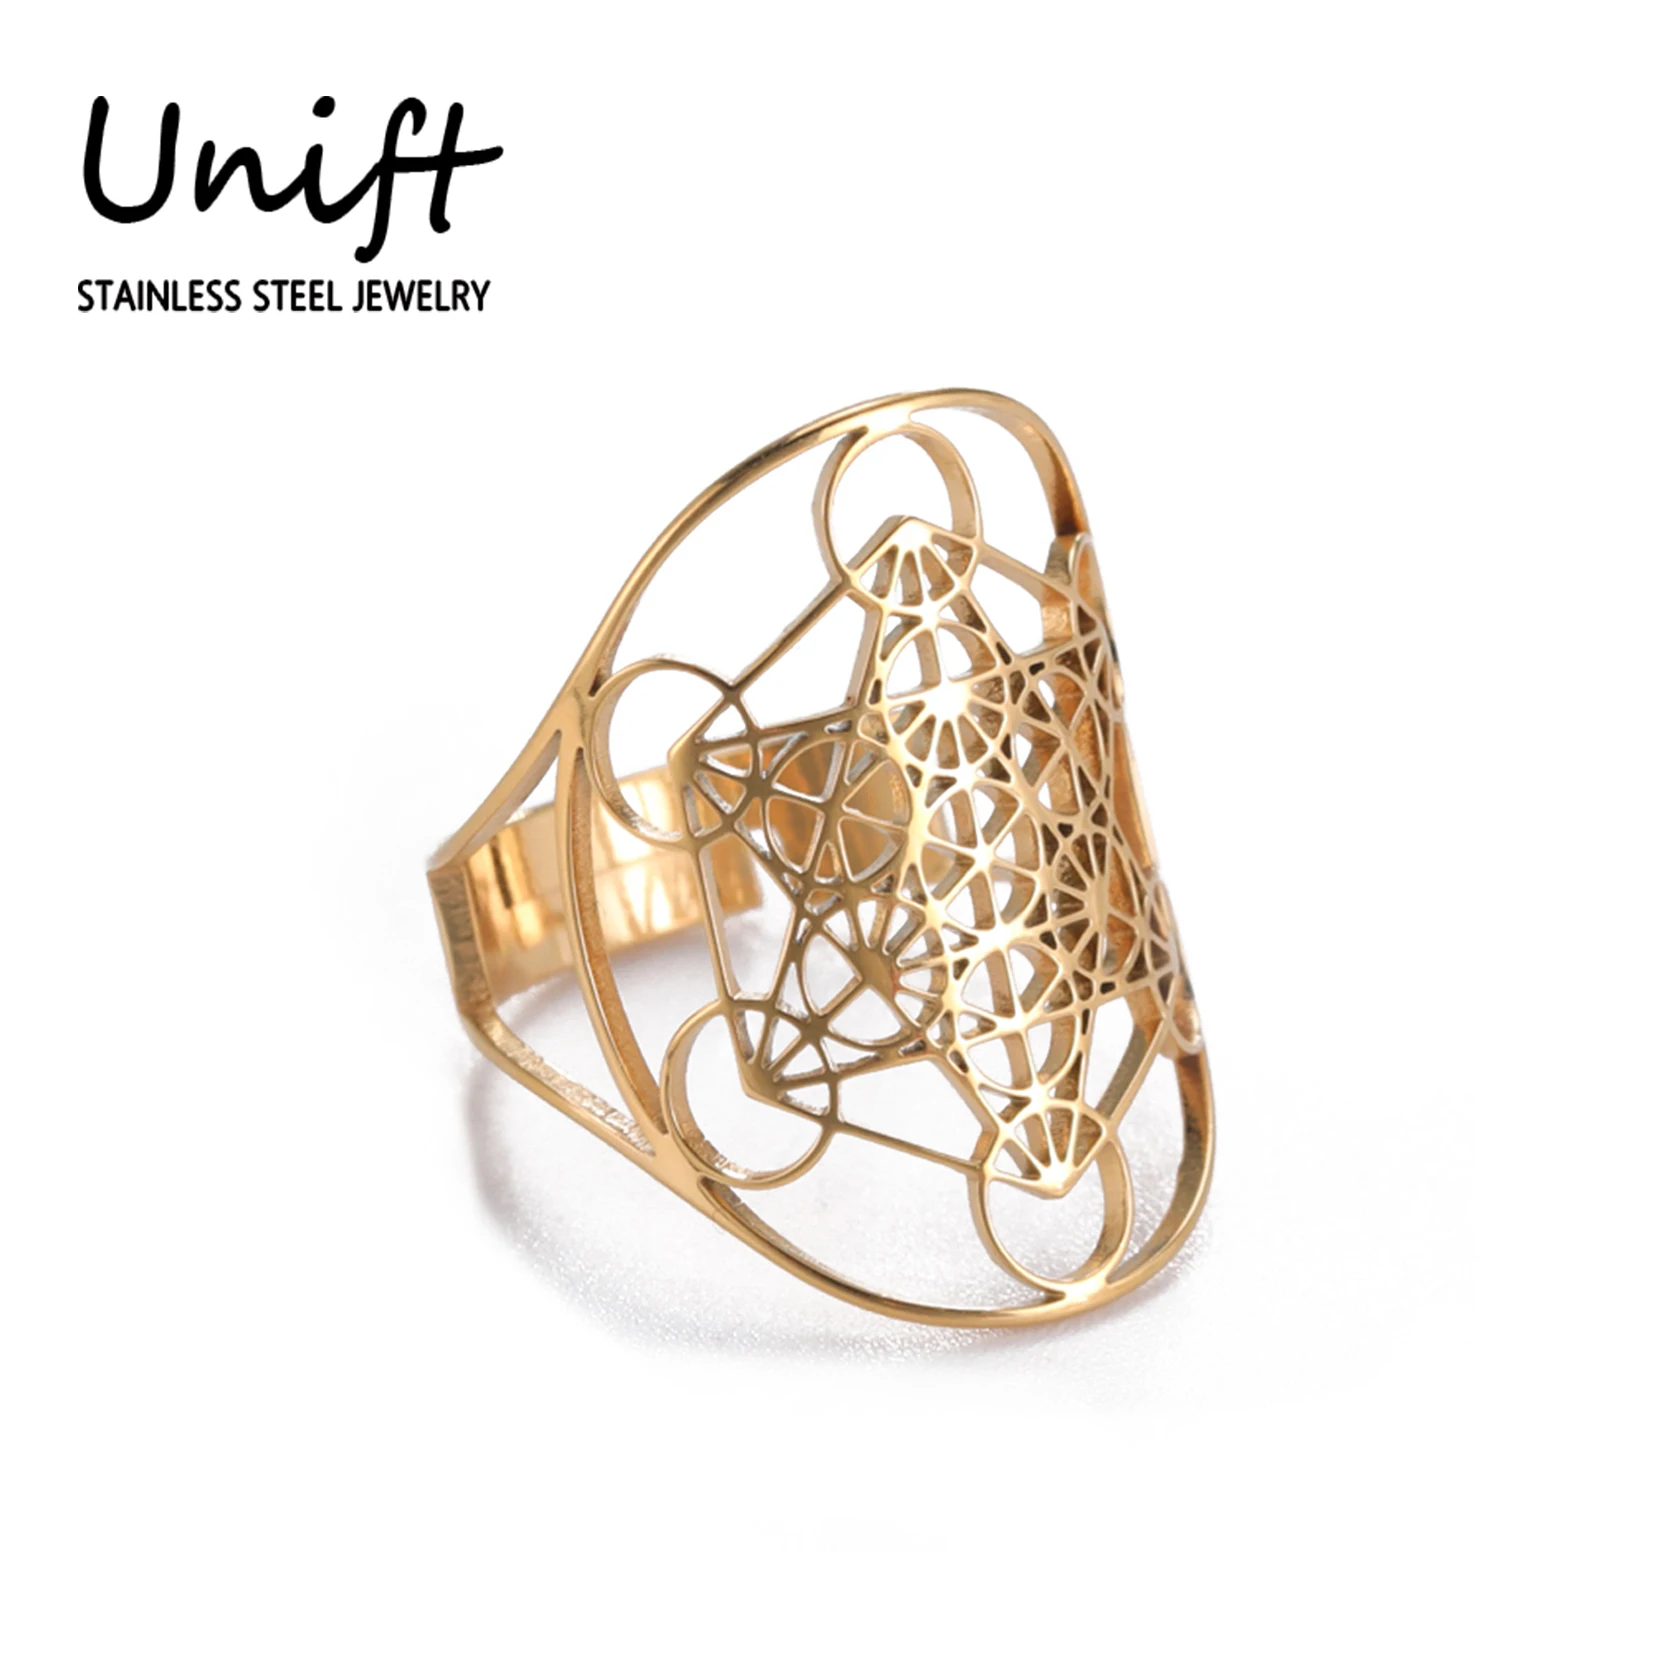 

Unift Vintage Metatron Cube Ring for Women Stainless Steel Rings Seal of Angel Yoga Lotus Amulet Jewish Jewelry Sacred Geometry